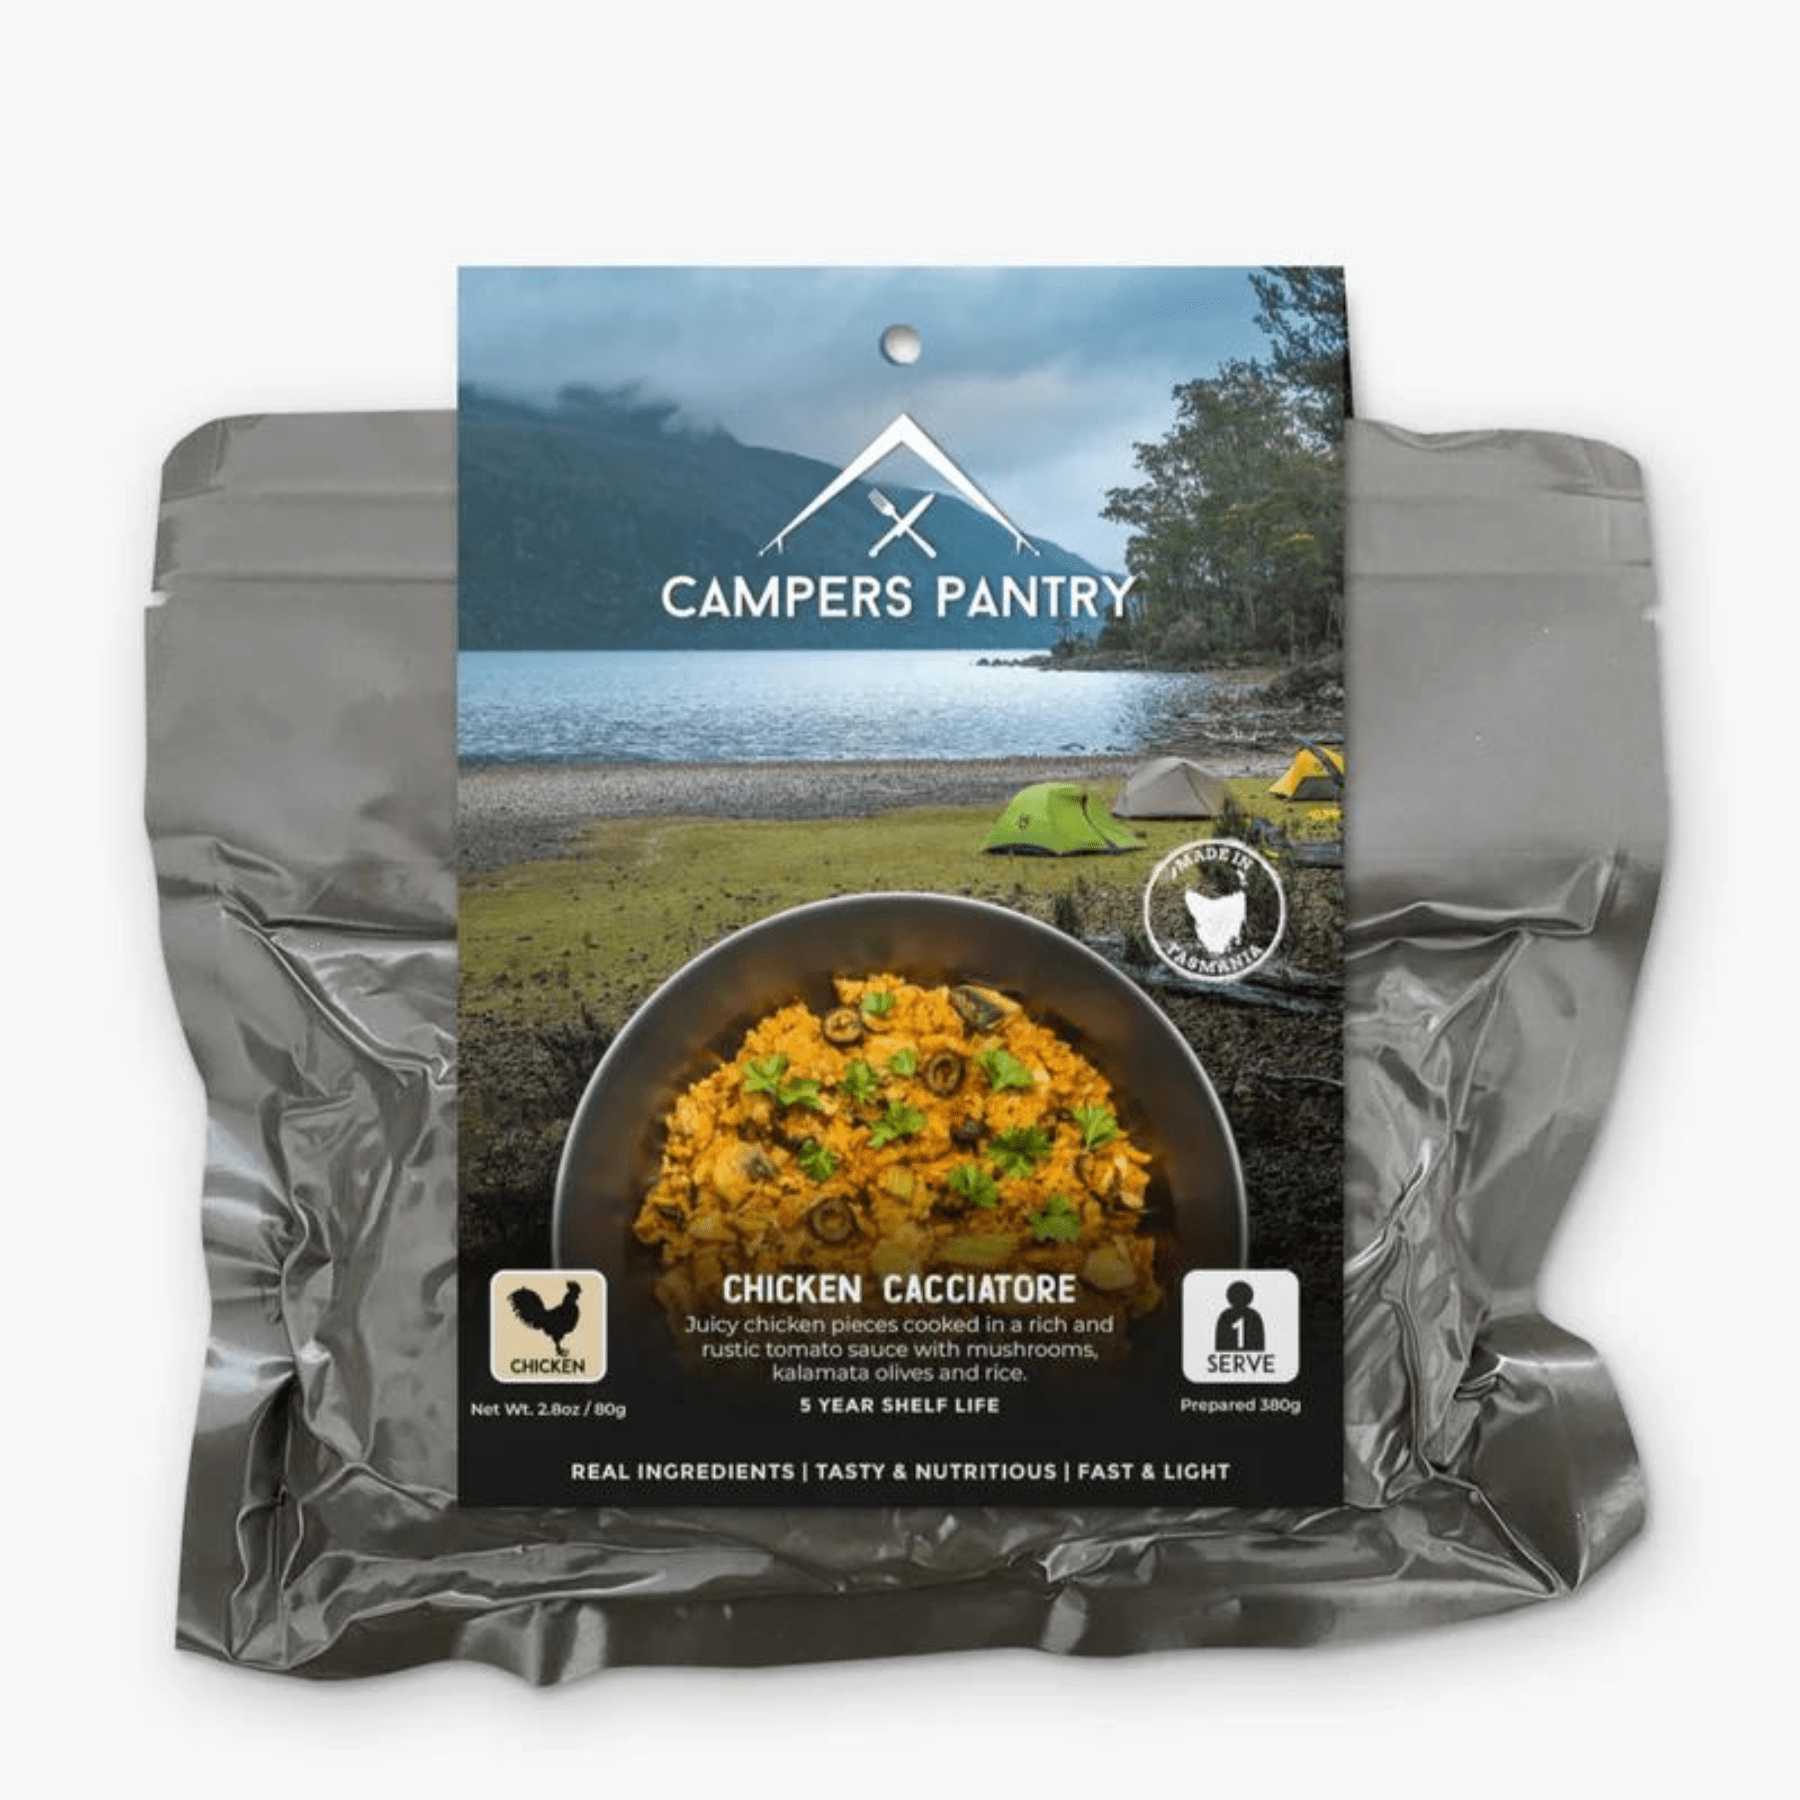 Campers Pantry Dehydrated Meals Freeze-dried Expedition Meals